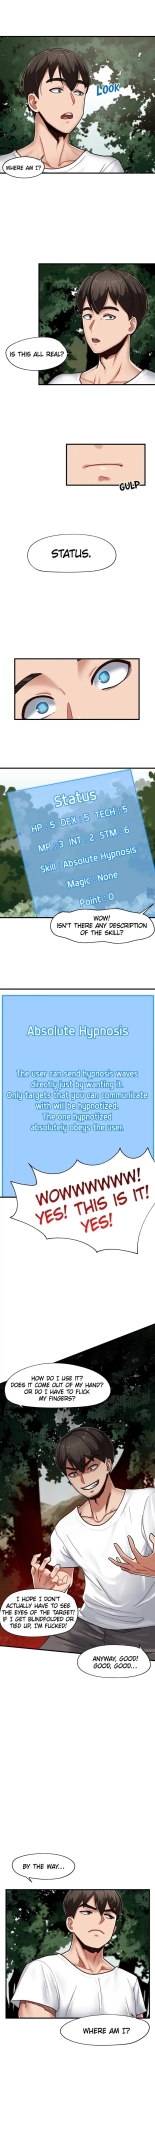 Absolute Hypnosis in Another World : página 9